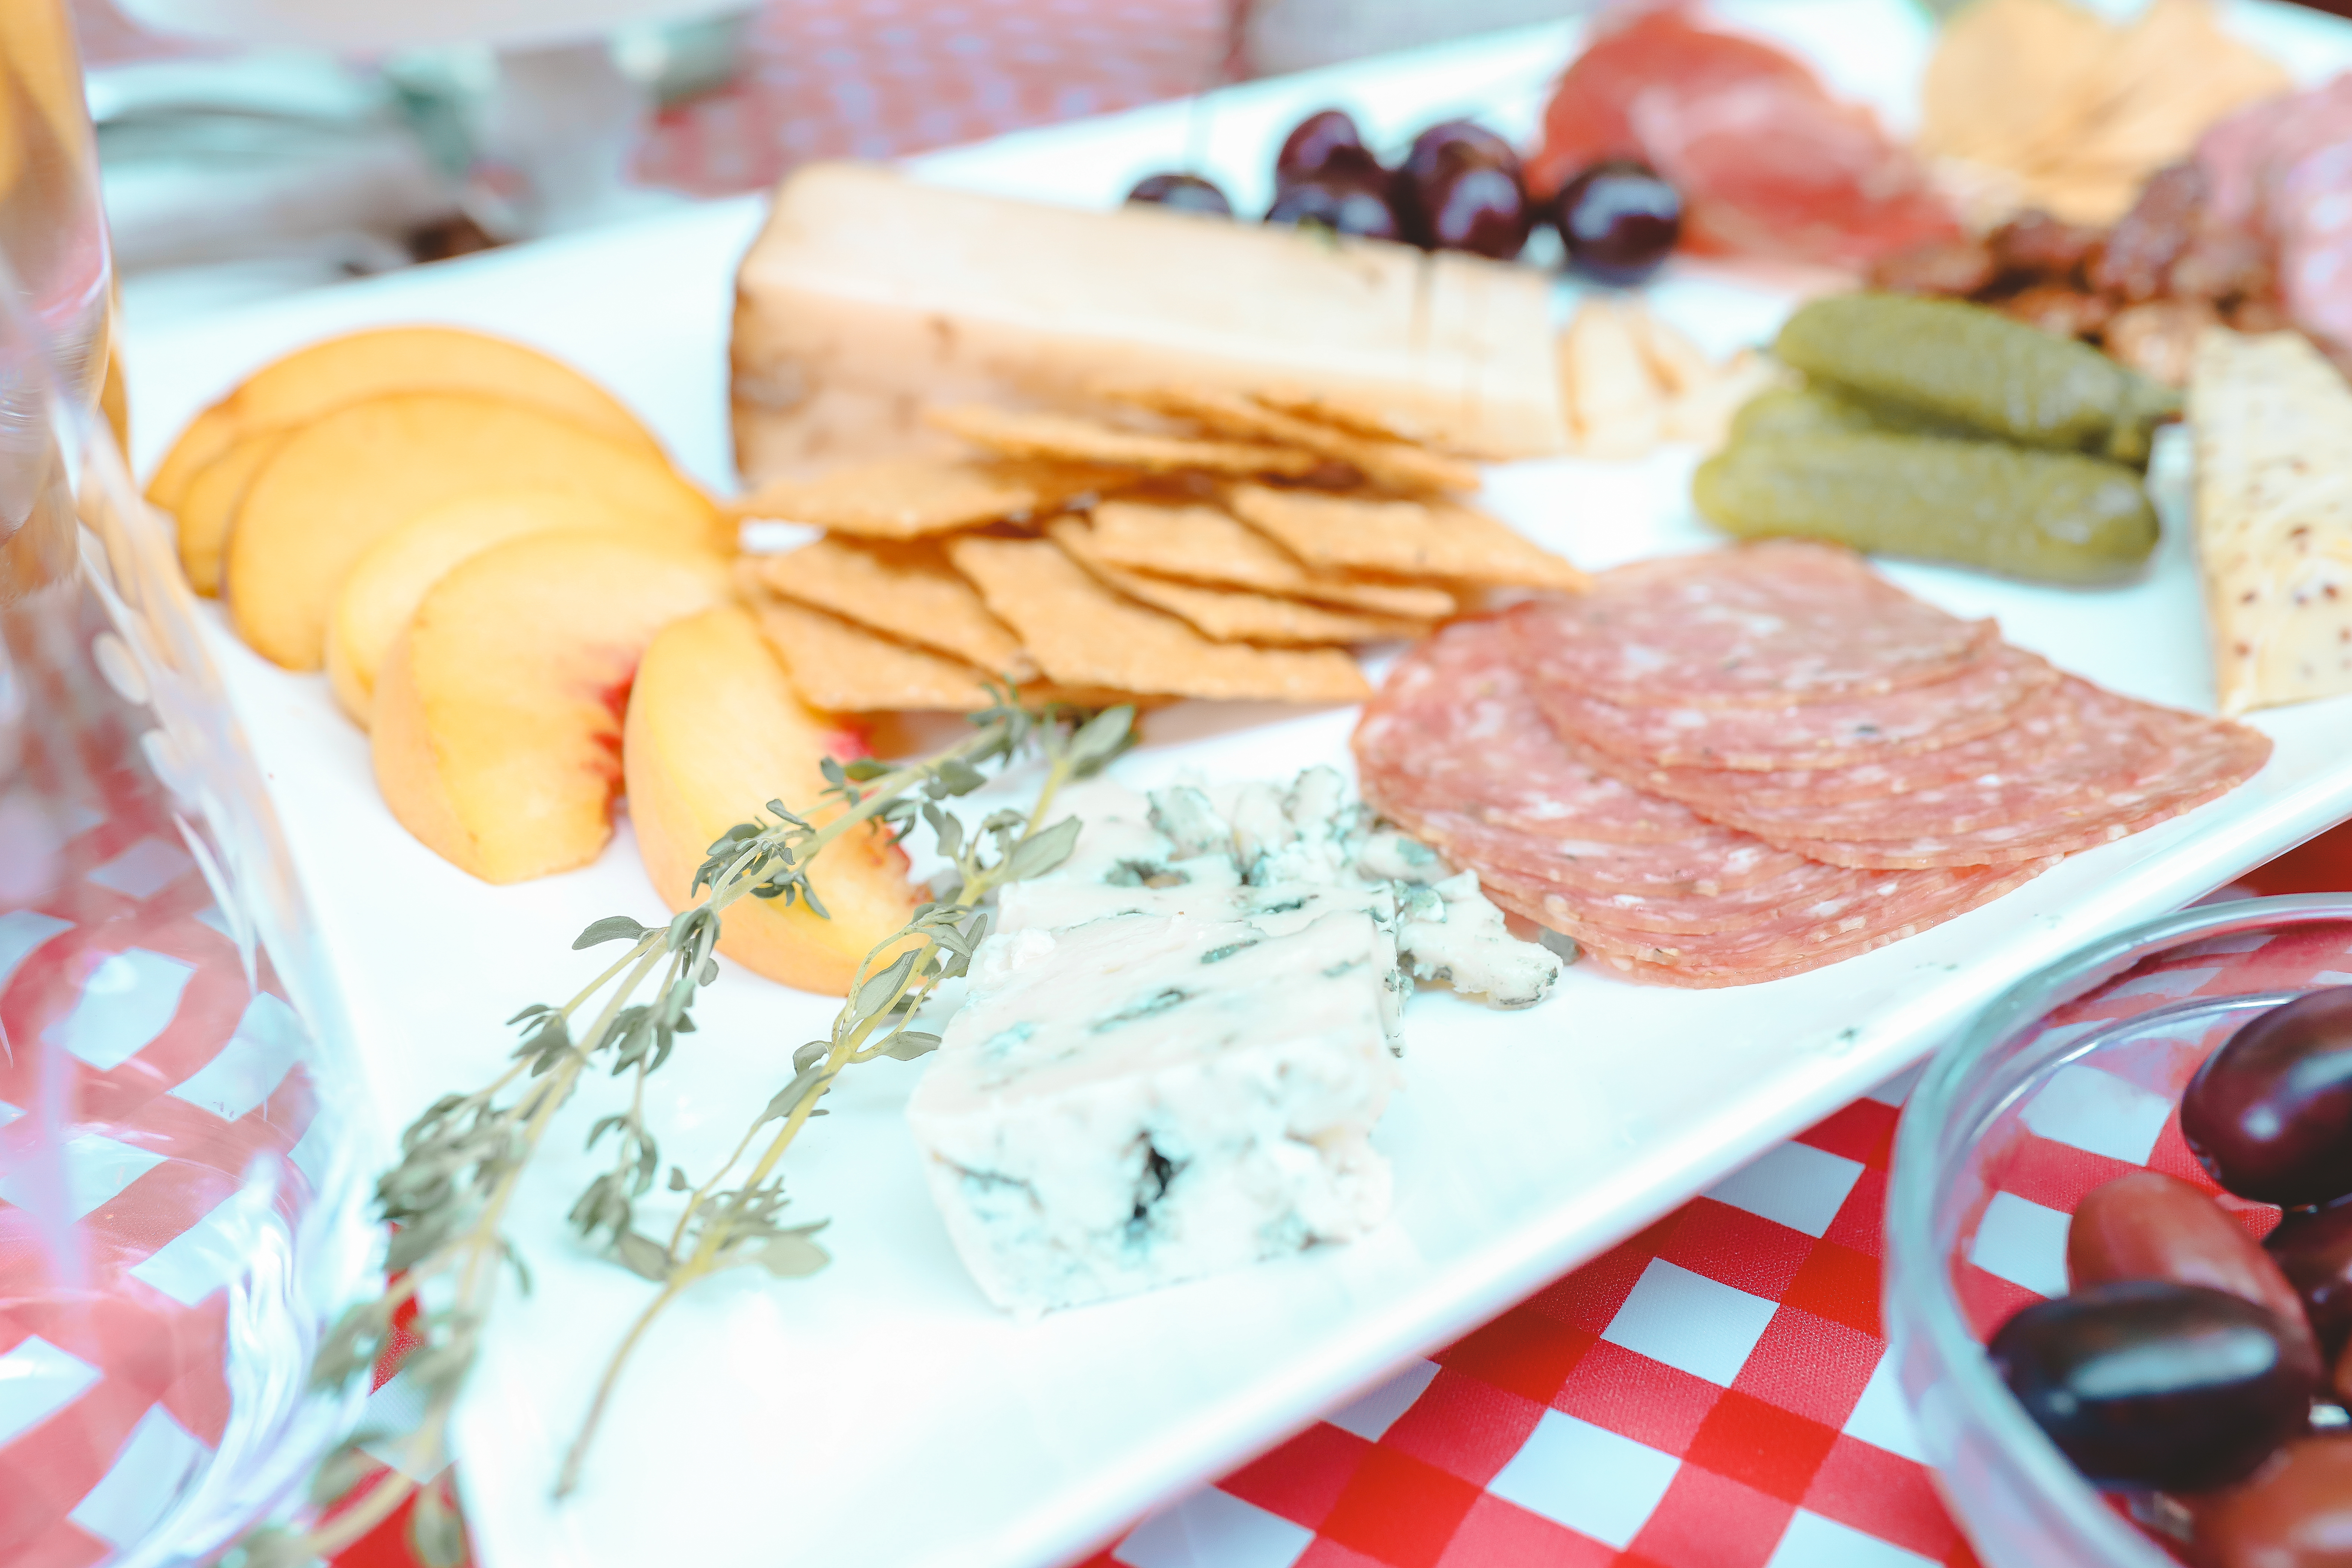 How to make a great charcuterie and cheese board.